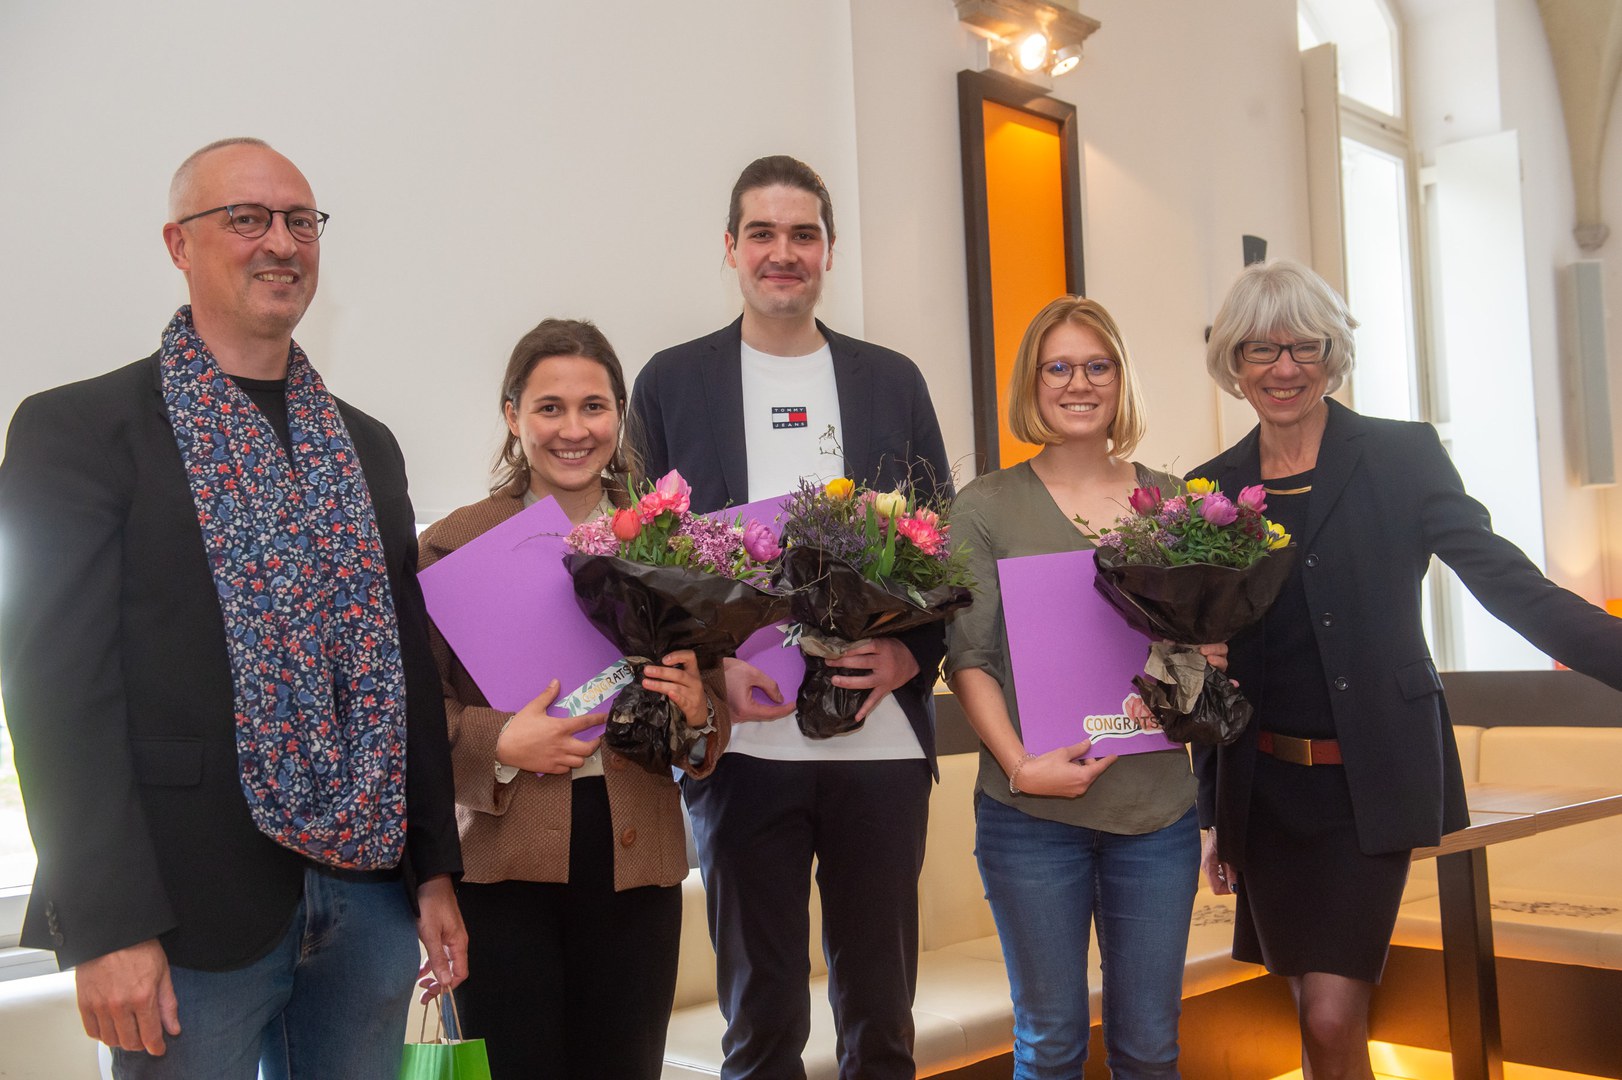 The Gender Studies Prize is awarded for outstanding theses and dissertations.